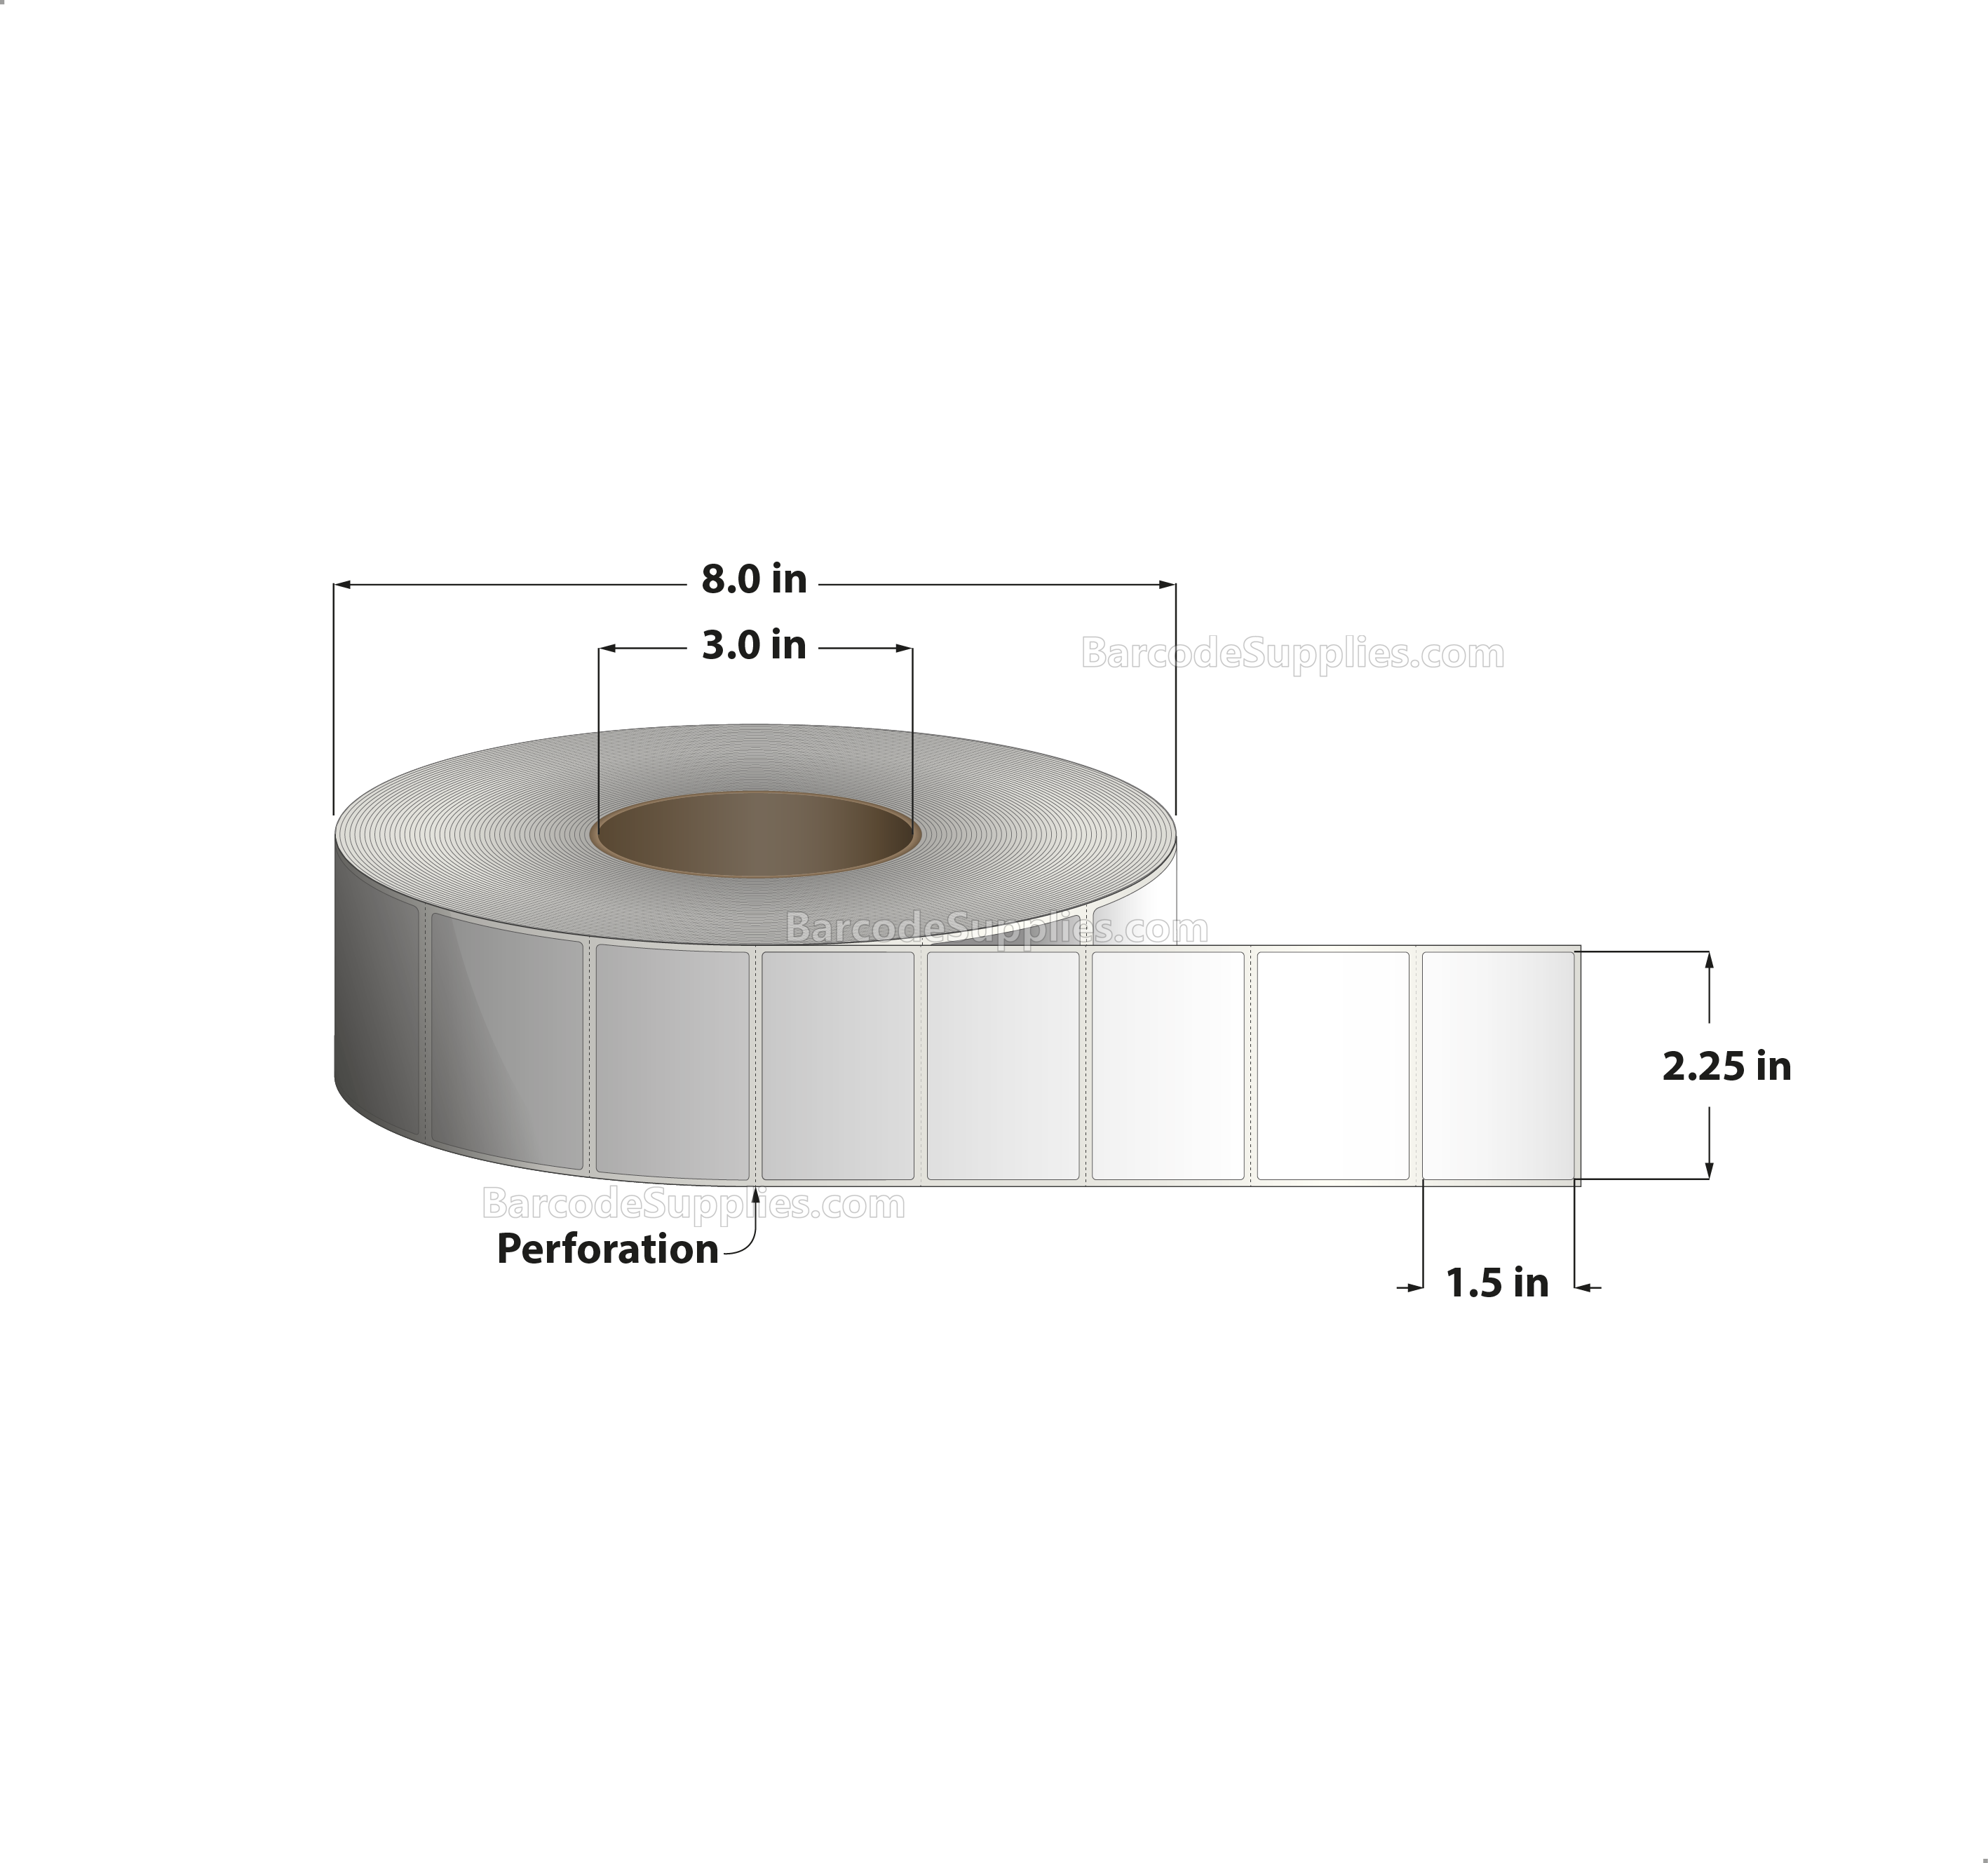 2.25 x 1.5 Direct Thermal White Labels With Rubber Adhesive - Perforated - 4308 Labels Per Roll - Carton Of 4 Rolls - 17232 Labels Total - MPN: DT225150-3P